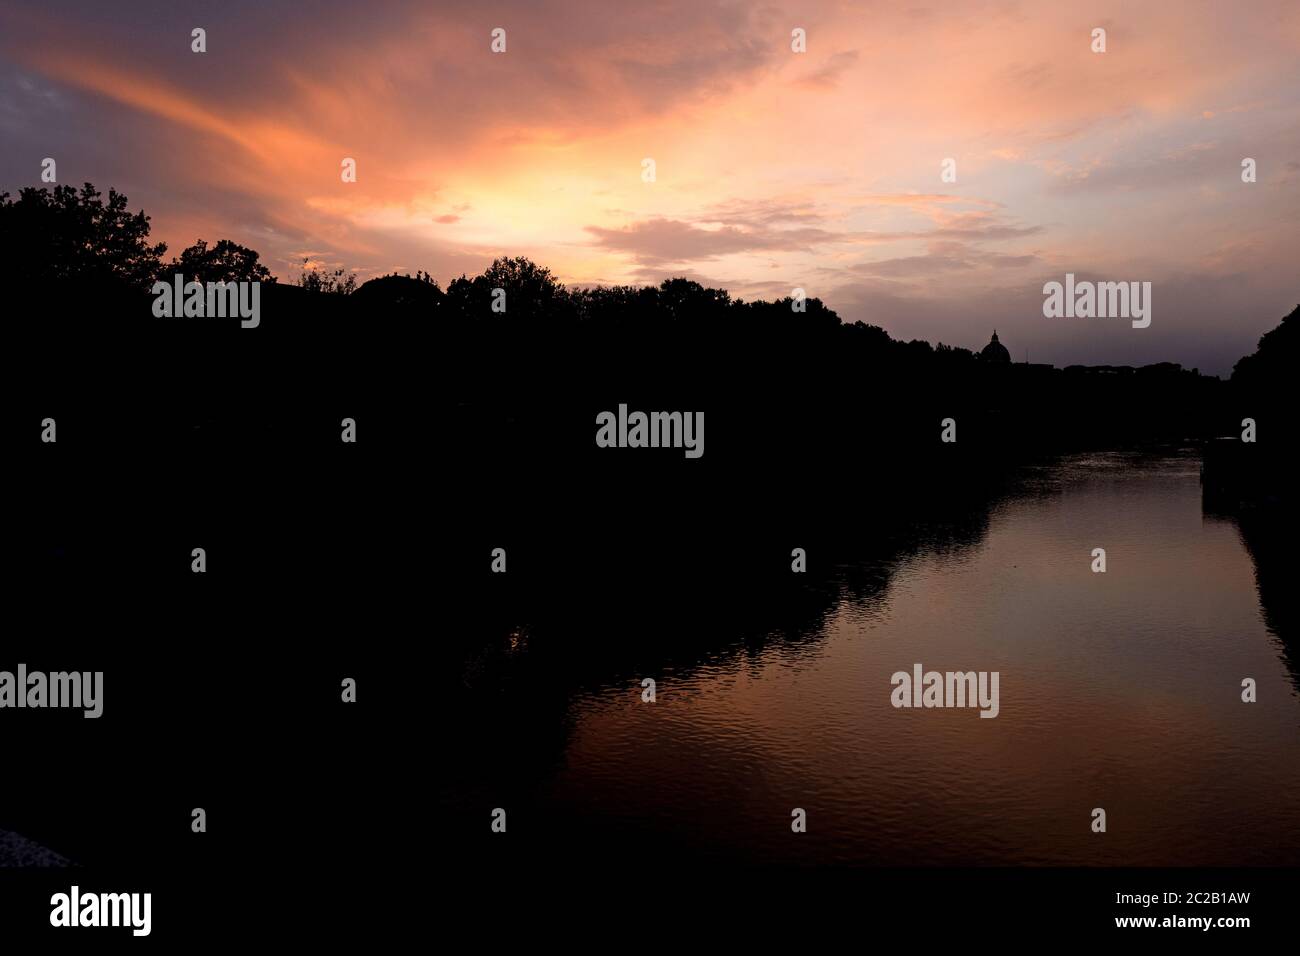 Sunset's sky reflected on Tiber river of Rome, Italy Stock Photo